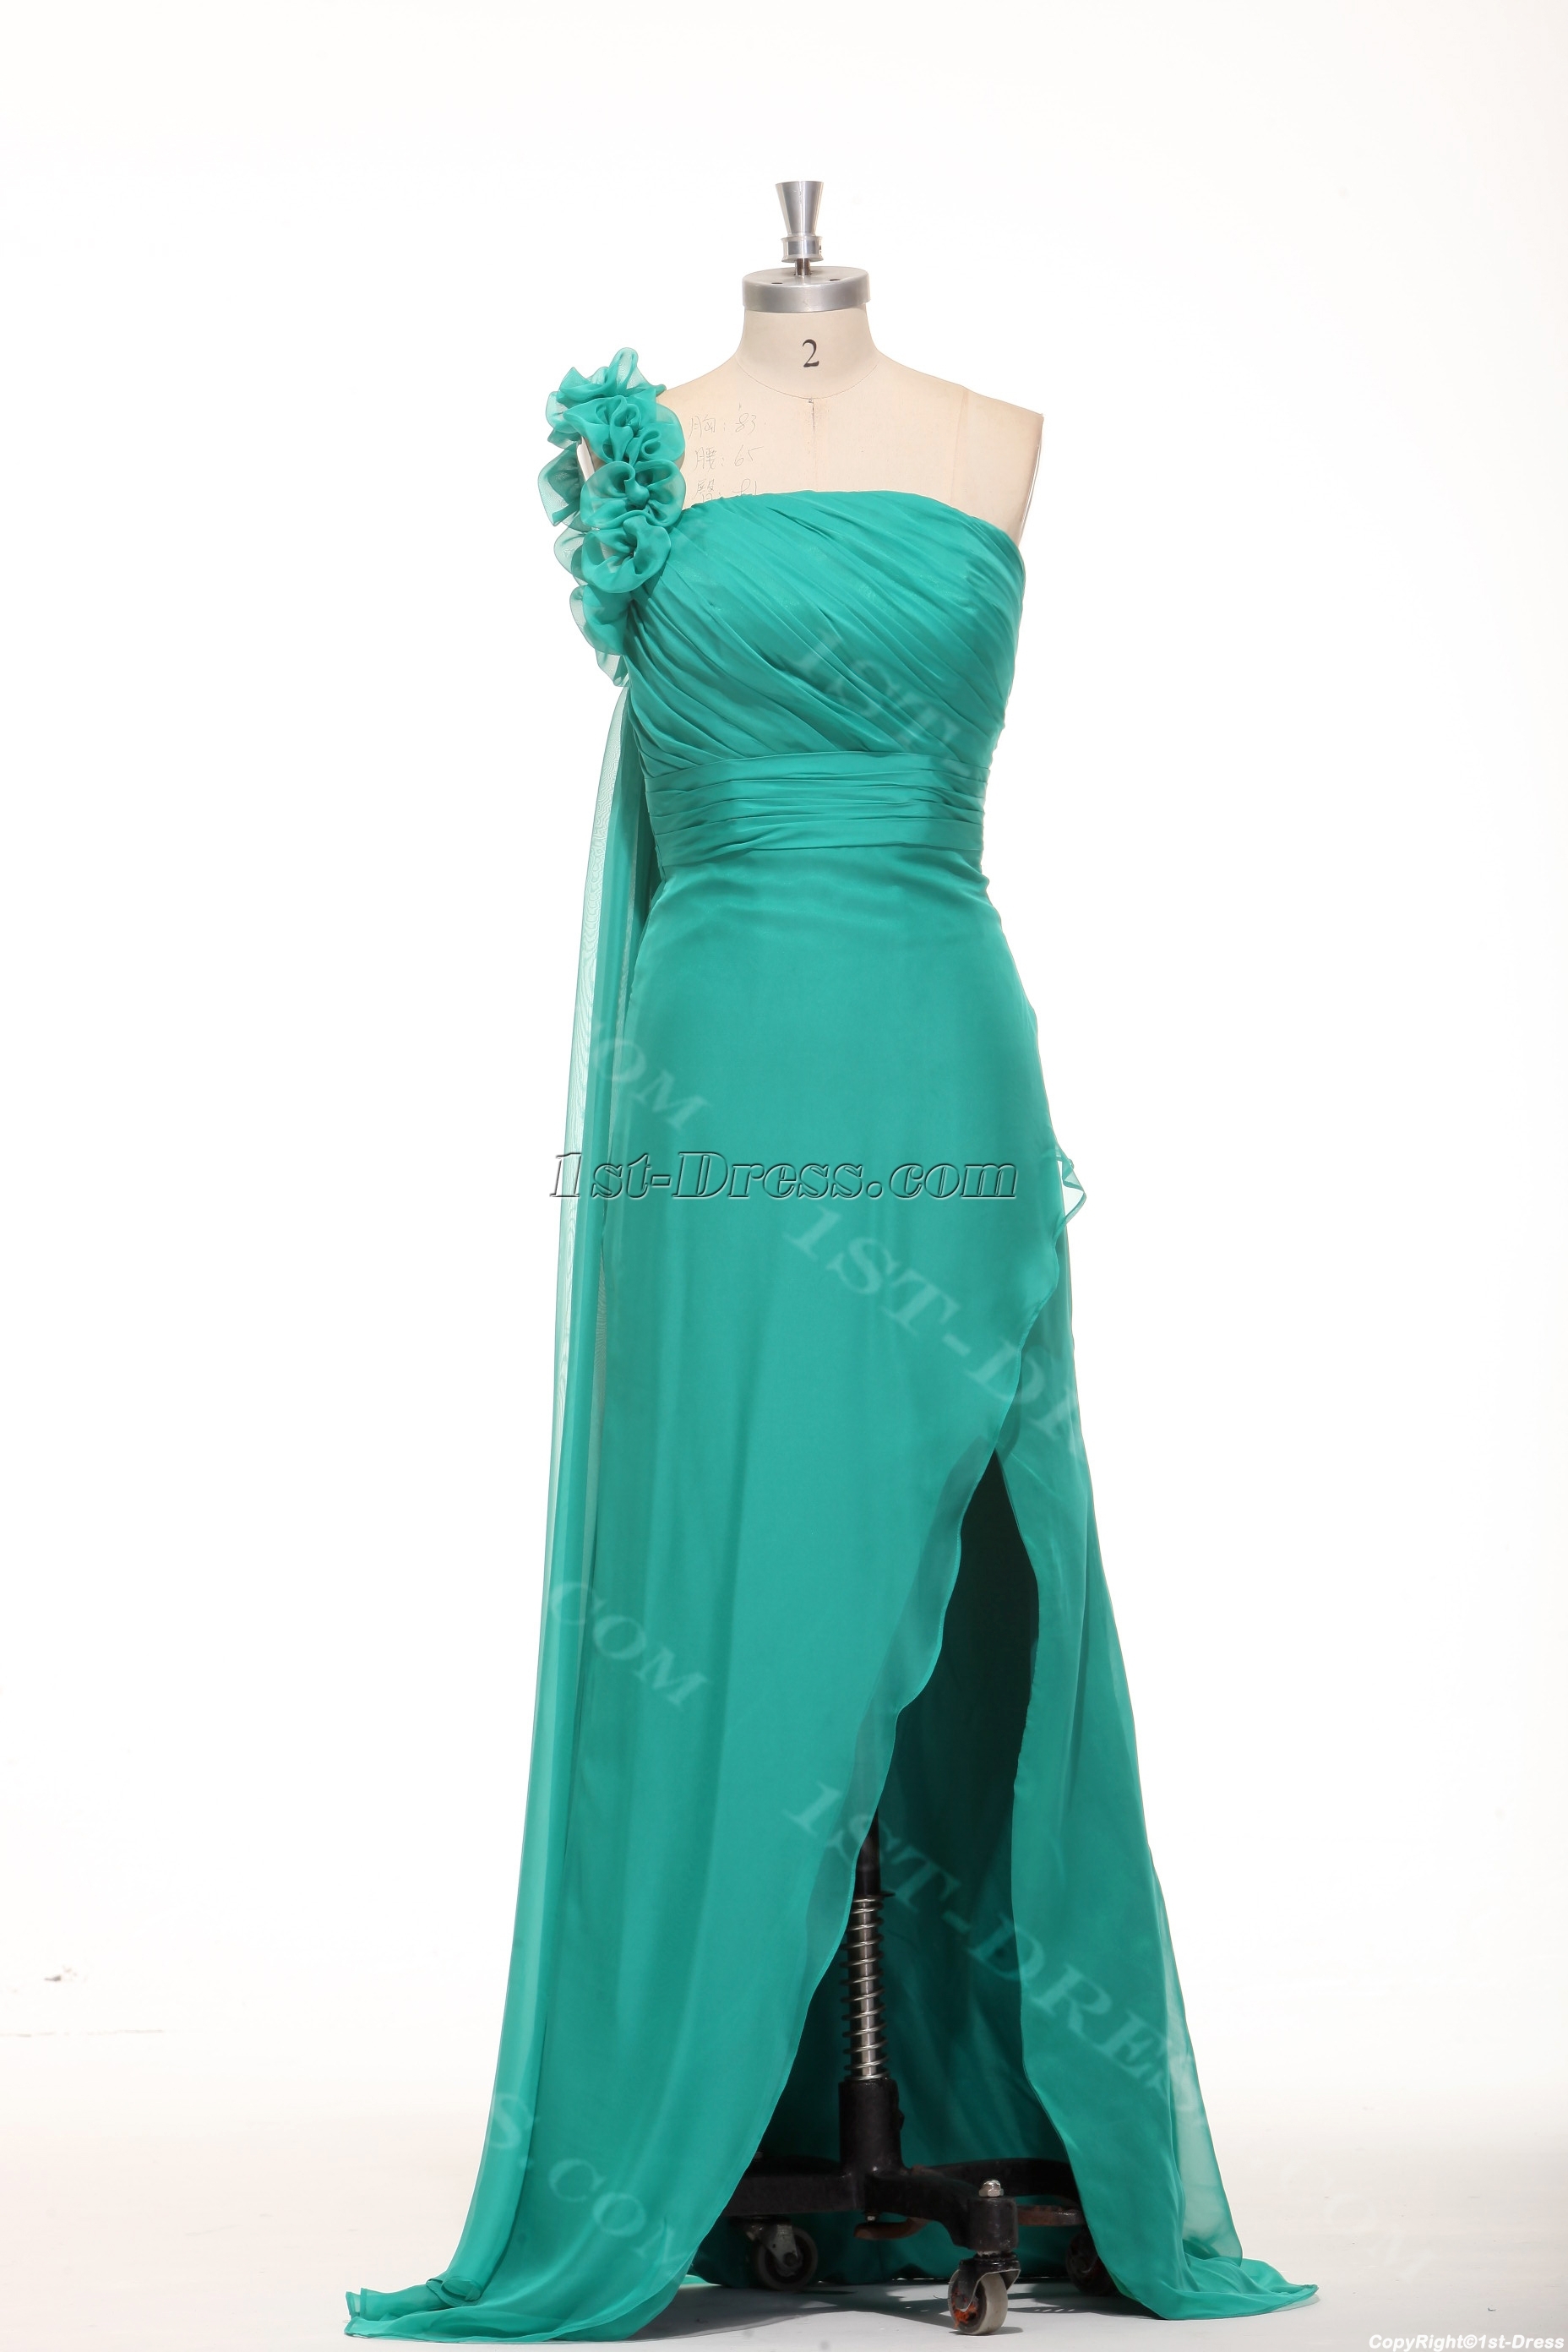 images/201309/big/Romantic-Green-One-Shoulder-Plus-Size-Prom-Dresses-with-Slit-Front-3036-b-1-1379846513.jpg